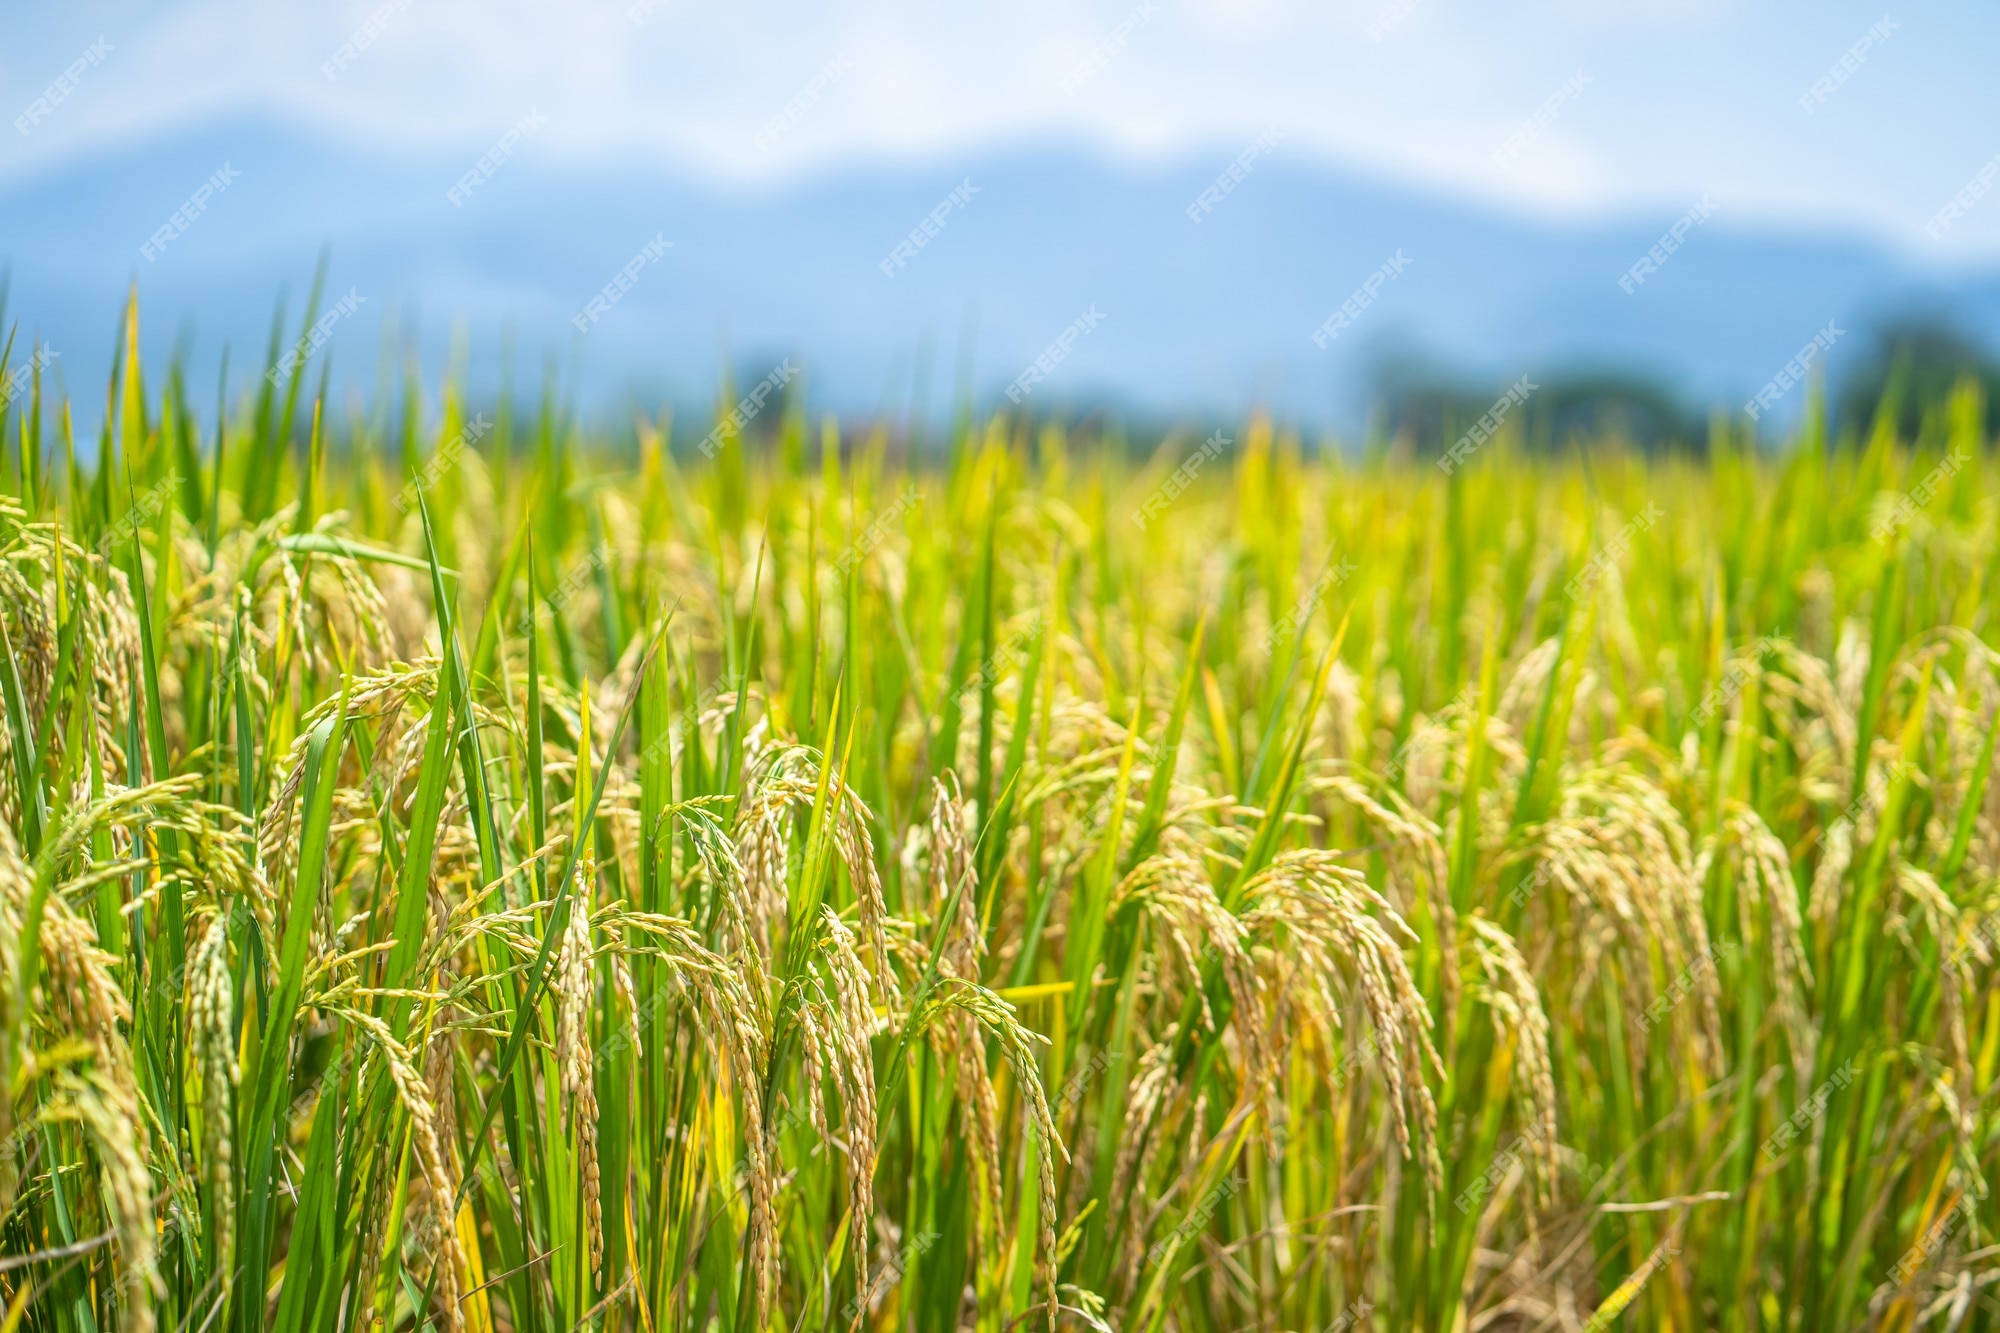 Premium Photo | Ripe rice paddy field for background